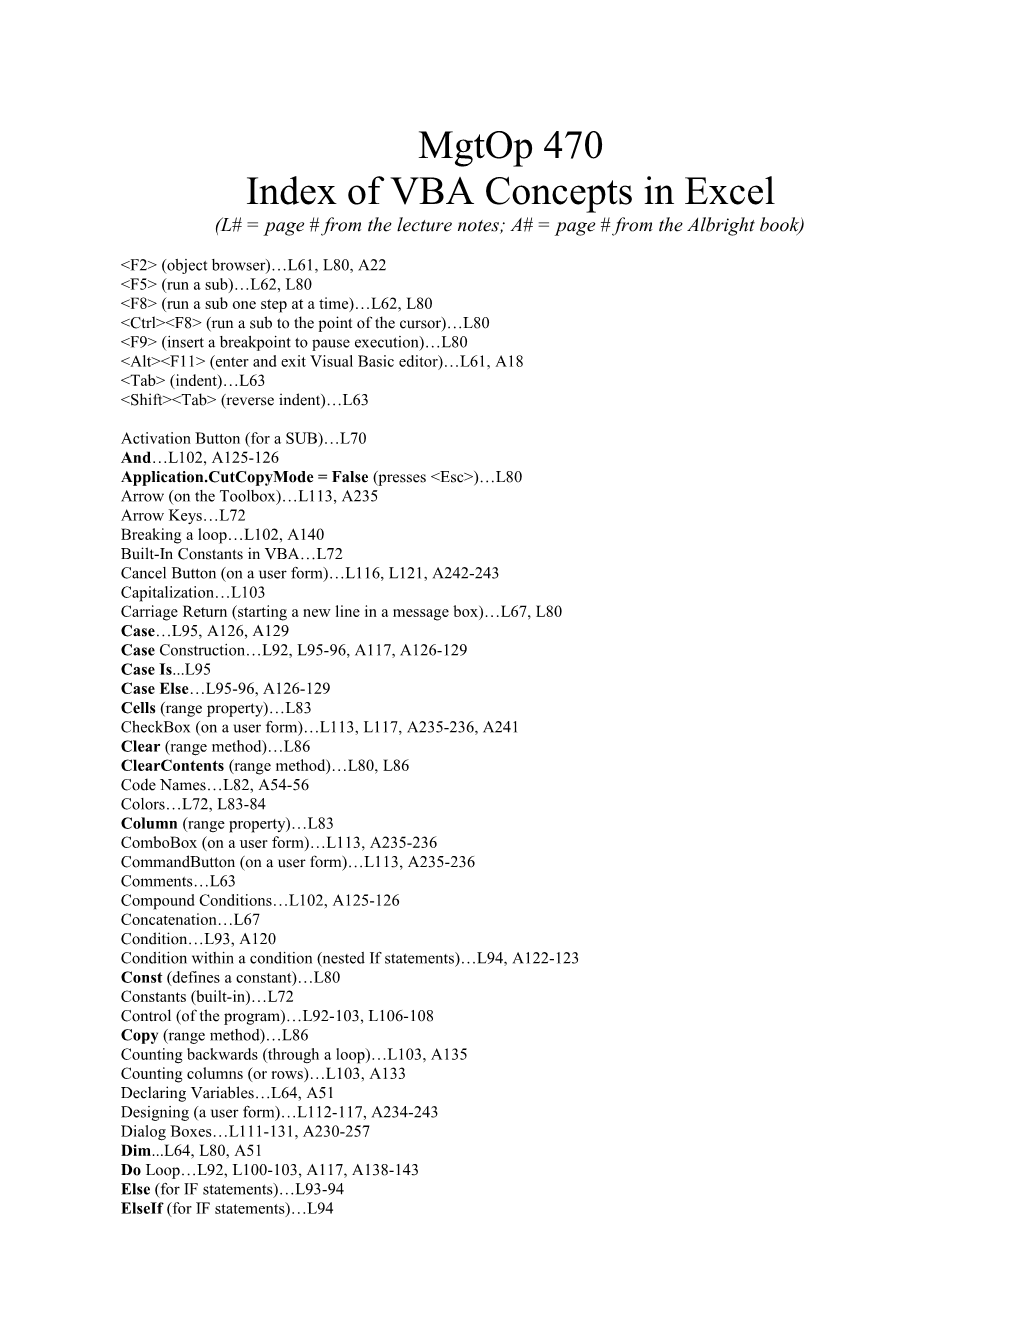 Index of VBA Concepts in Excel